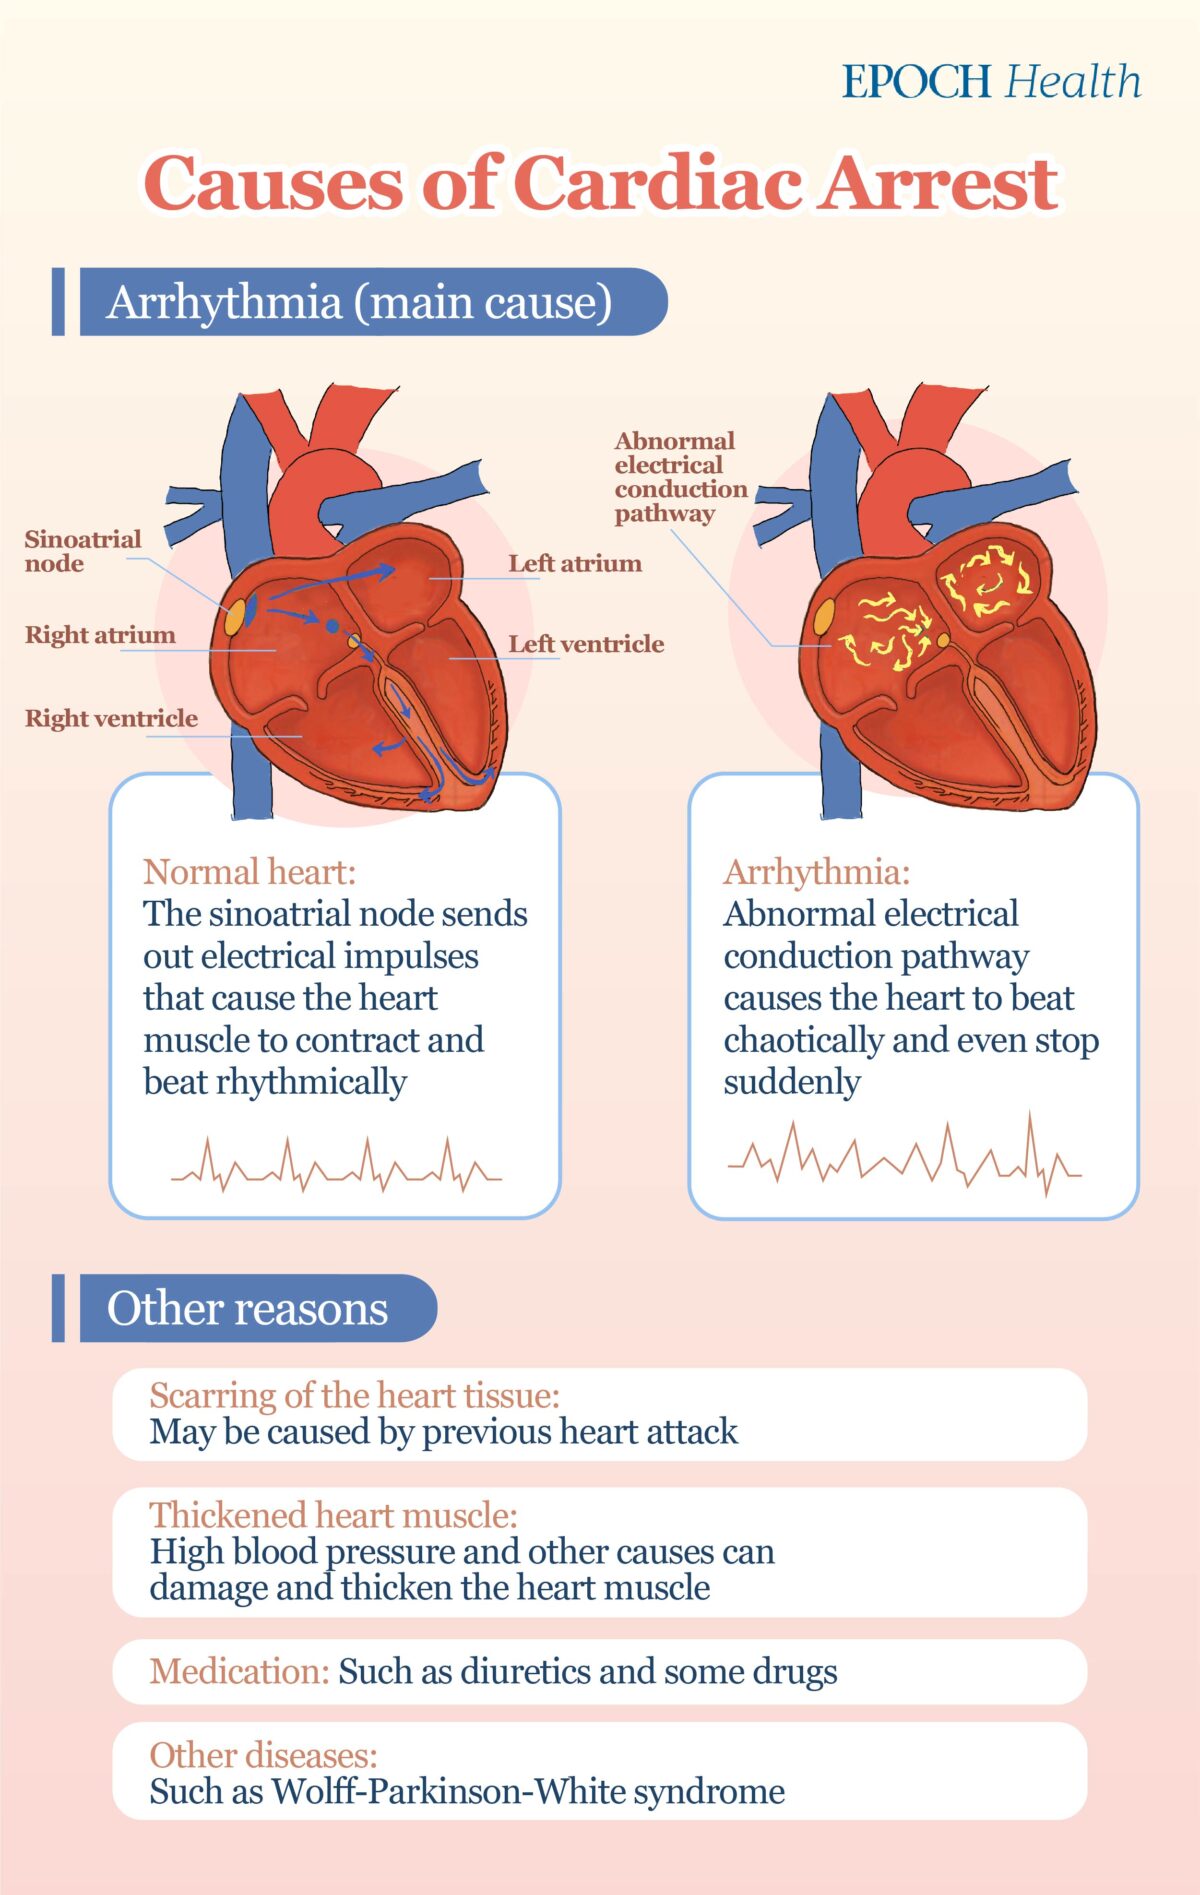 The main cause of cardiac arrest is arrhythmia, and other causes include previous heart attack and cardiomyopathy. (The Epoch Times)